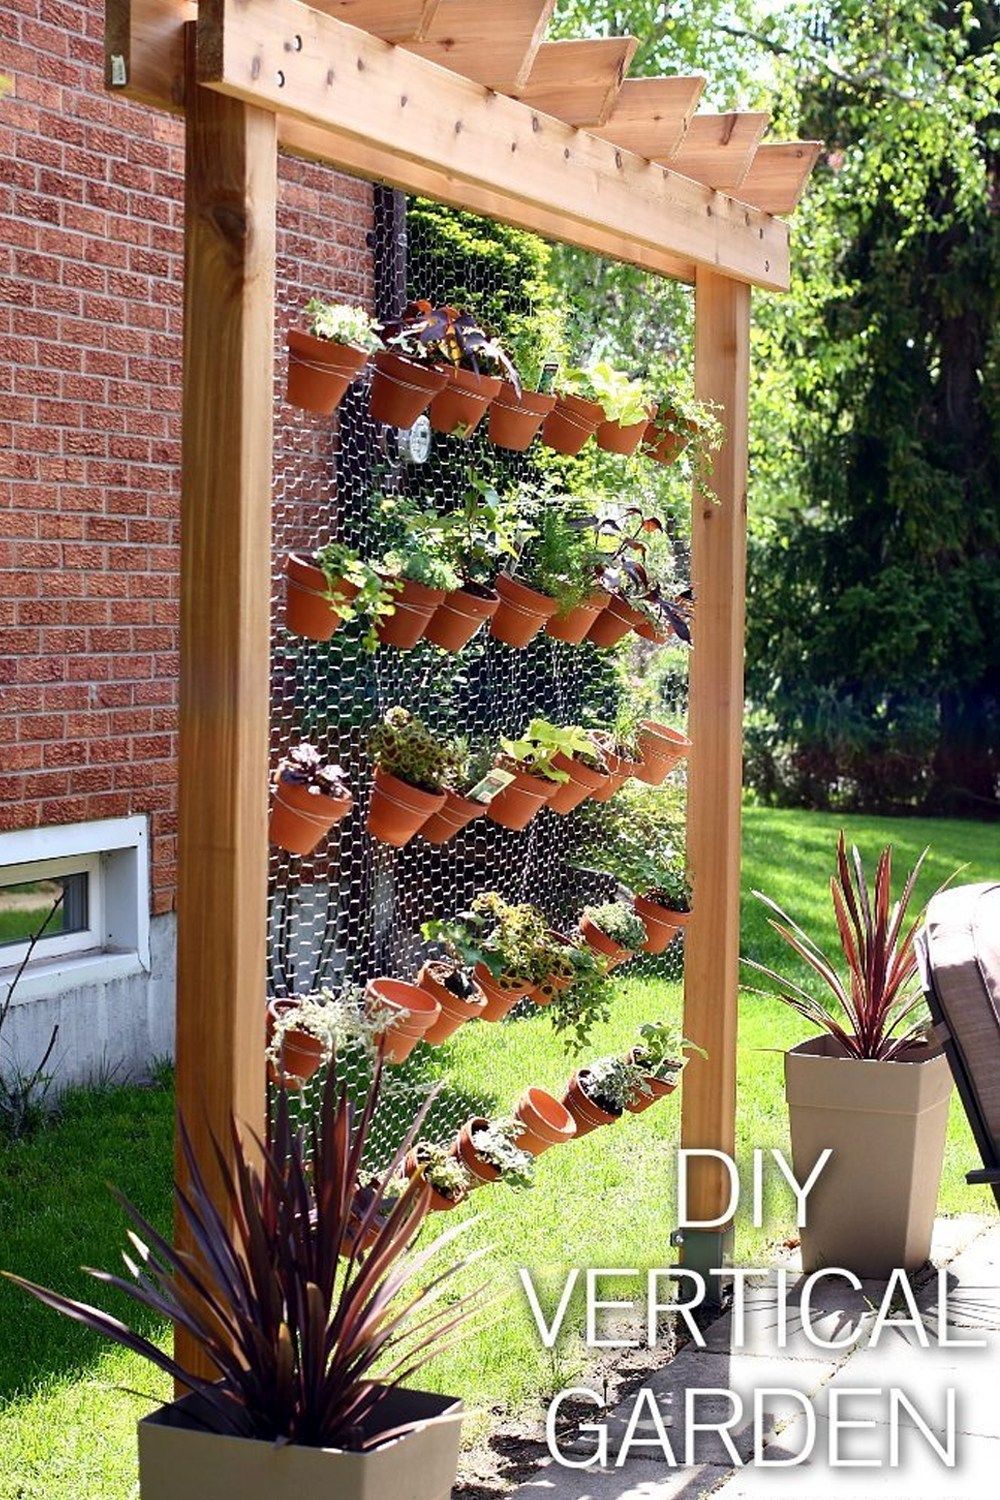 50 amazing backyard projects theres something for everyone 5d6a4f0b7be45 - 50 پروژه حیرت انگیز طراحی حیاط خلوت